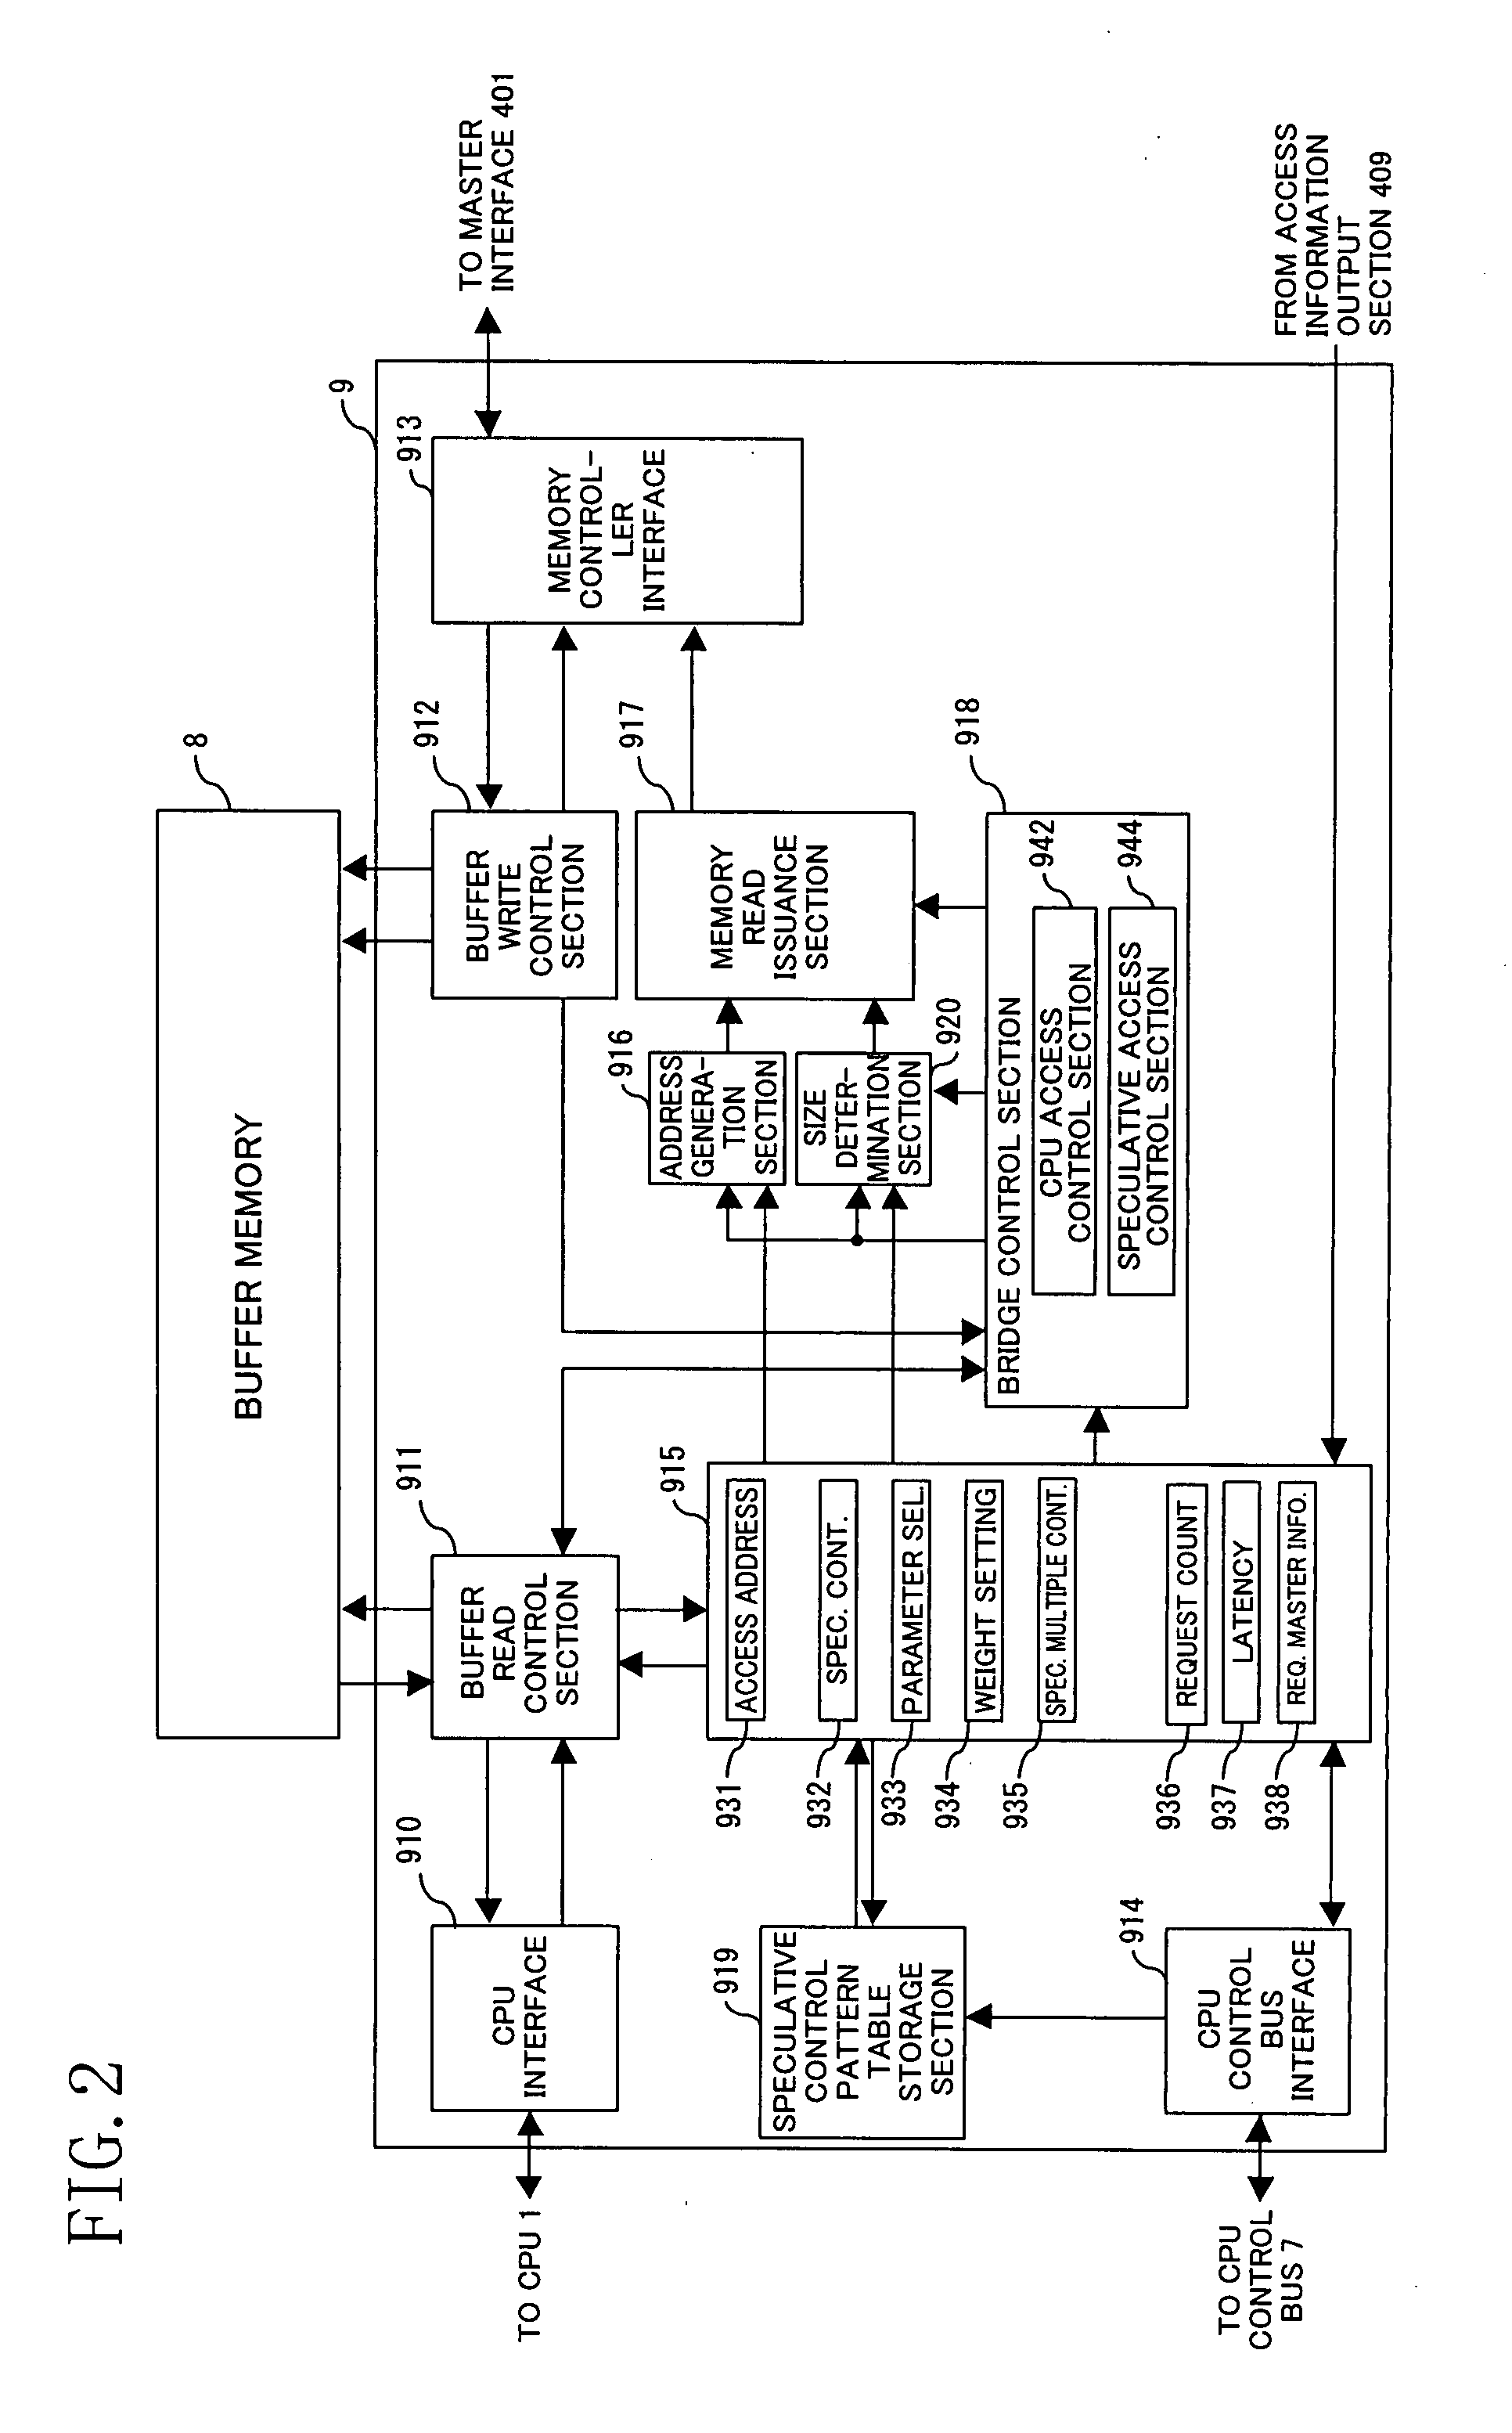 Unified memory system